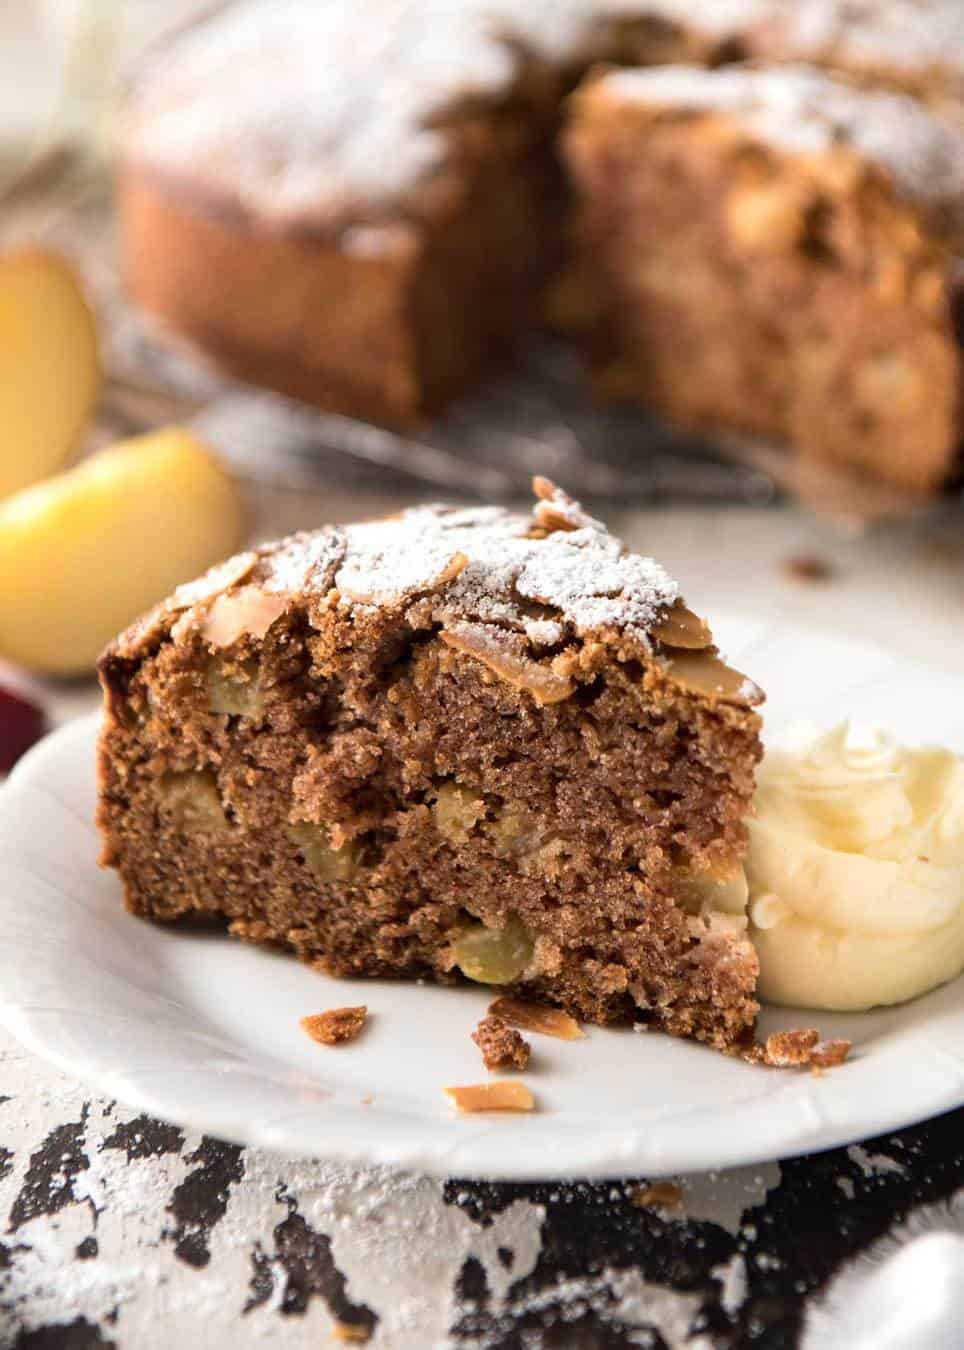 Hands down, the easiest and BEST Apple Cake recipe you will ever try! Made with fresh apples, no electric mixer required to make this beautiful moist cake. www.recipetineats.com